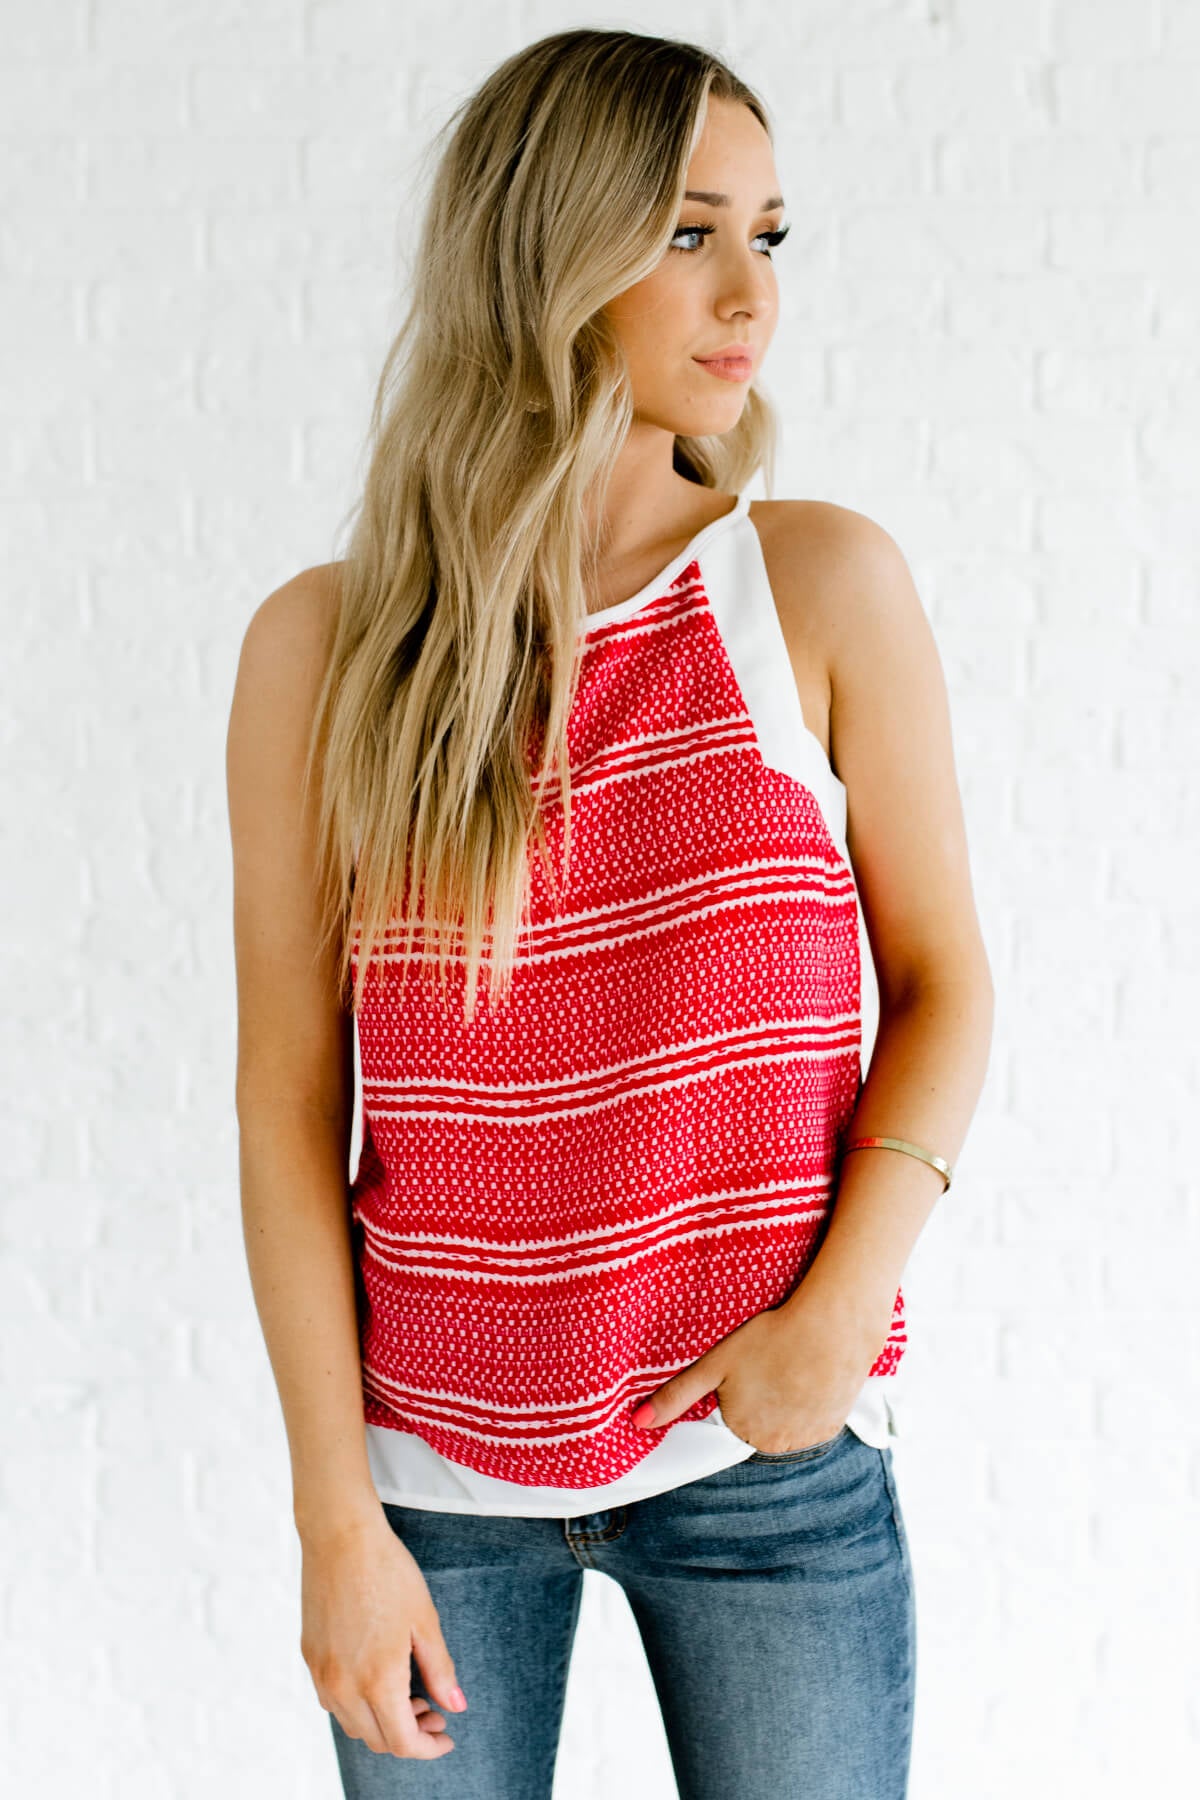 Women's Red Cute and Comfortable Boutique Tank Tops